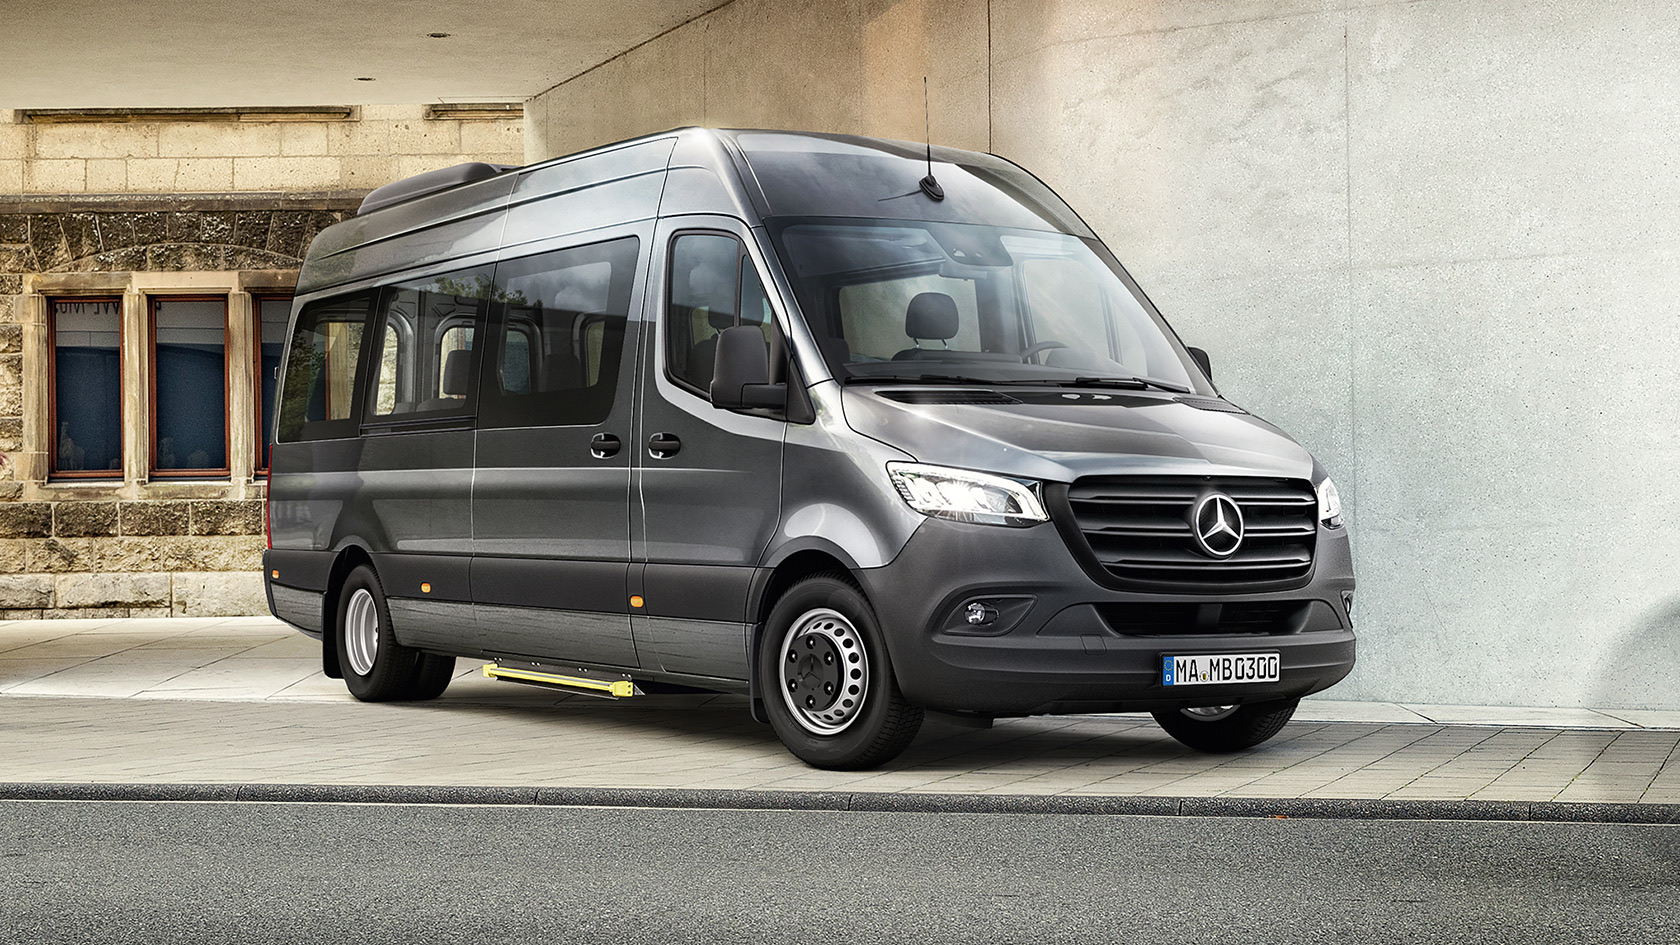 Why Choose a 16 Seater Minibus for Group Travel?